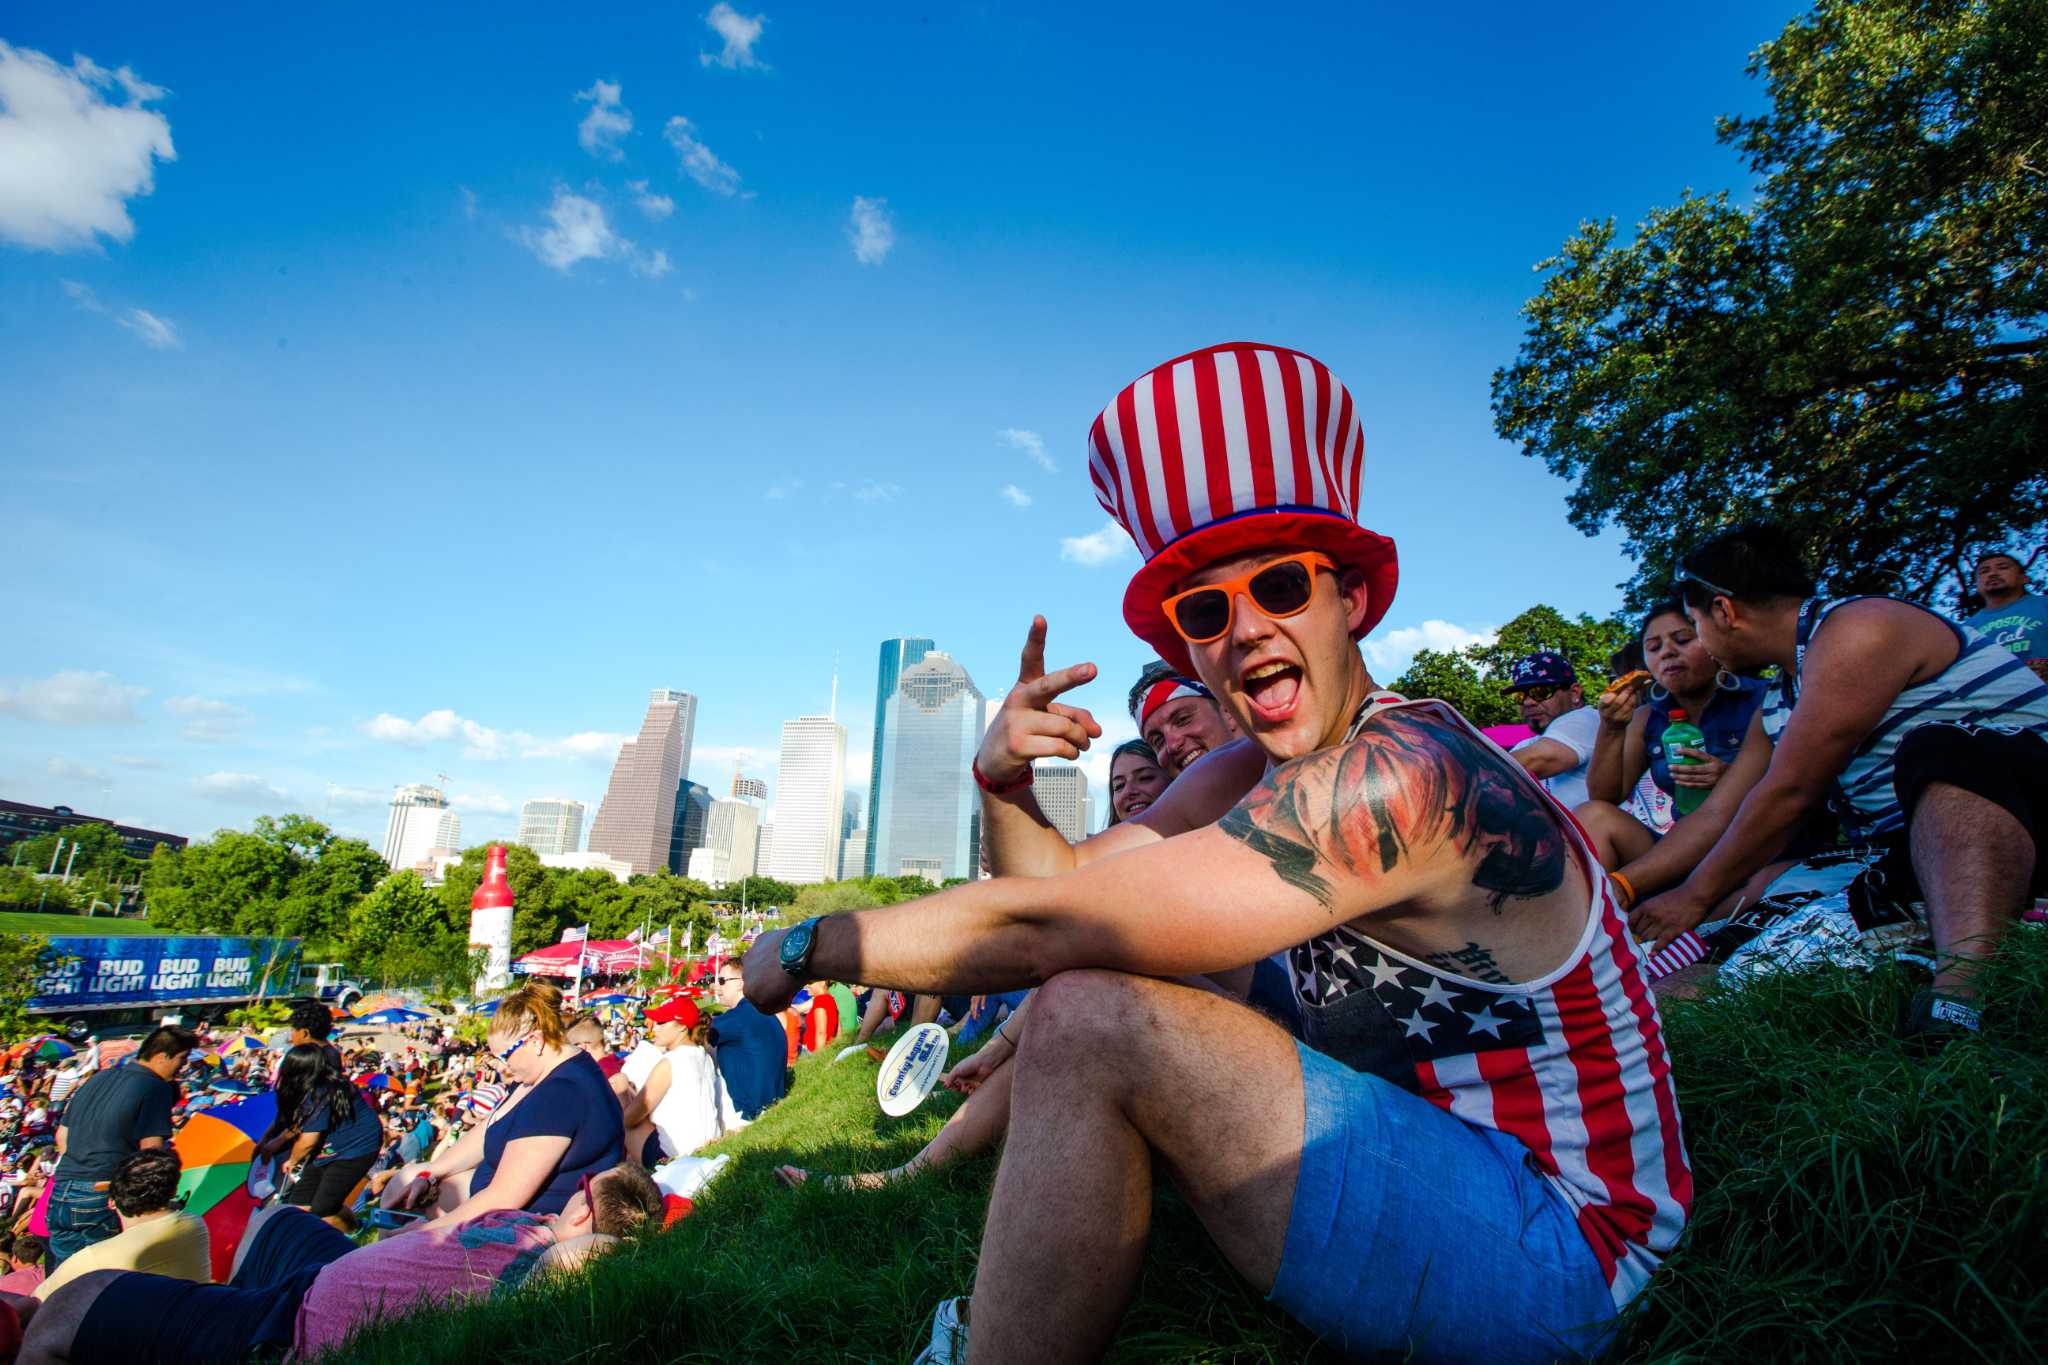 Fun, familyfriendly events in Houston for July 4th and beyond